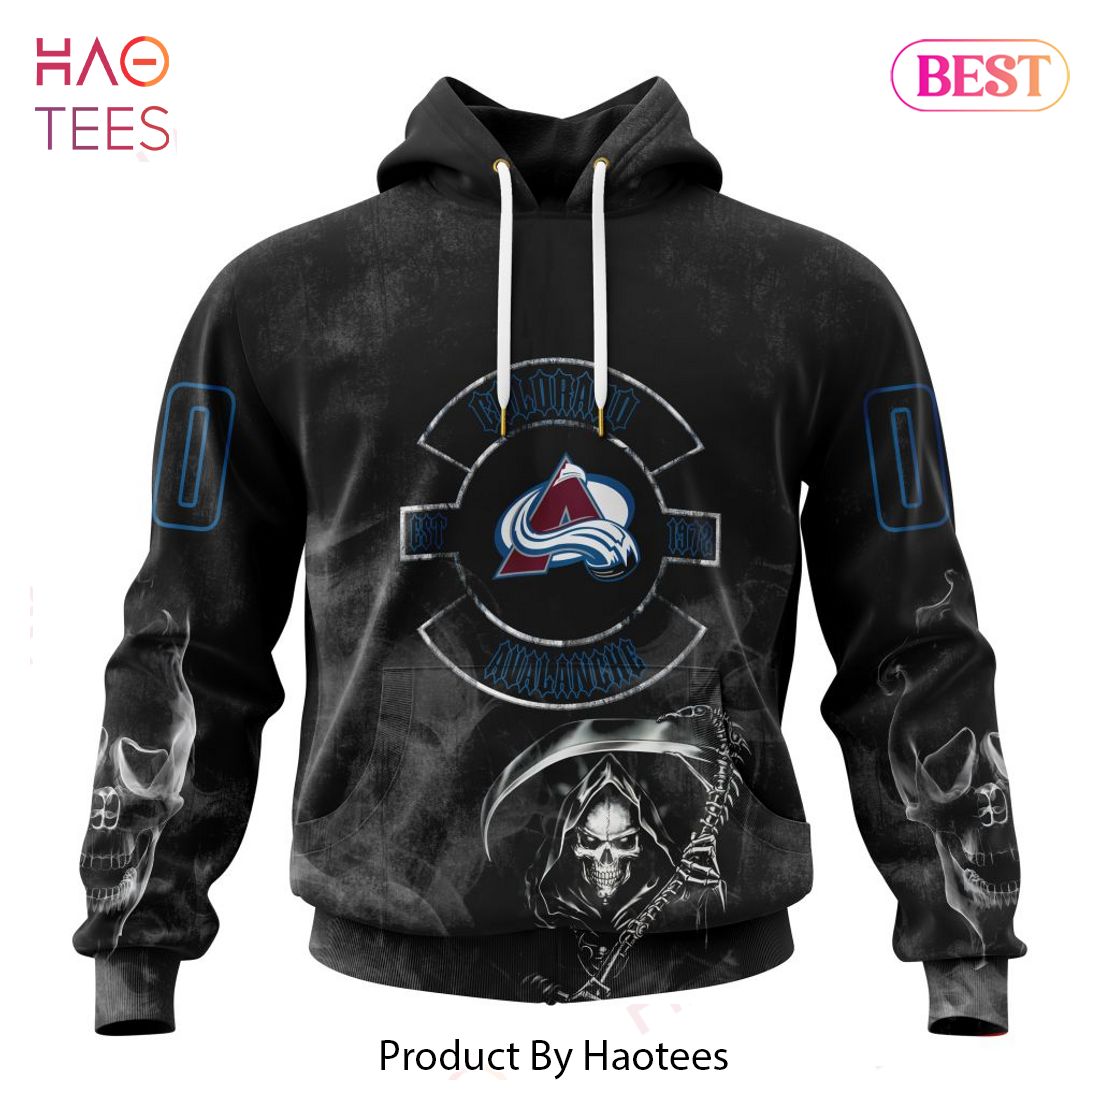 BEST NHL Colorado Avalanche Specialized Kits For Rock Night 3D Hoodie